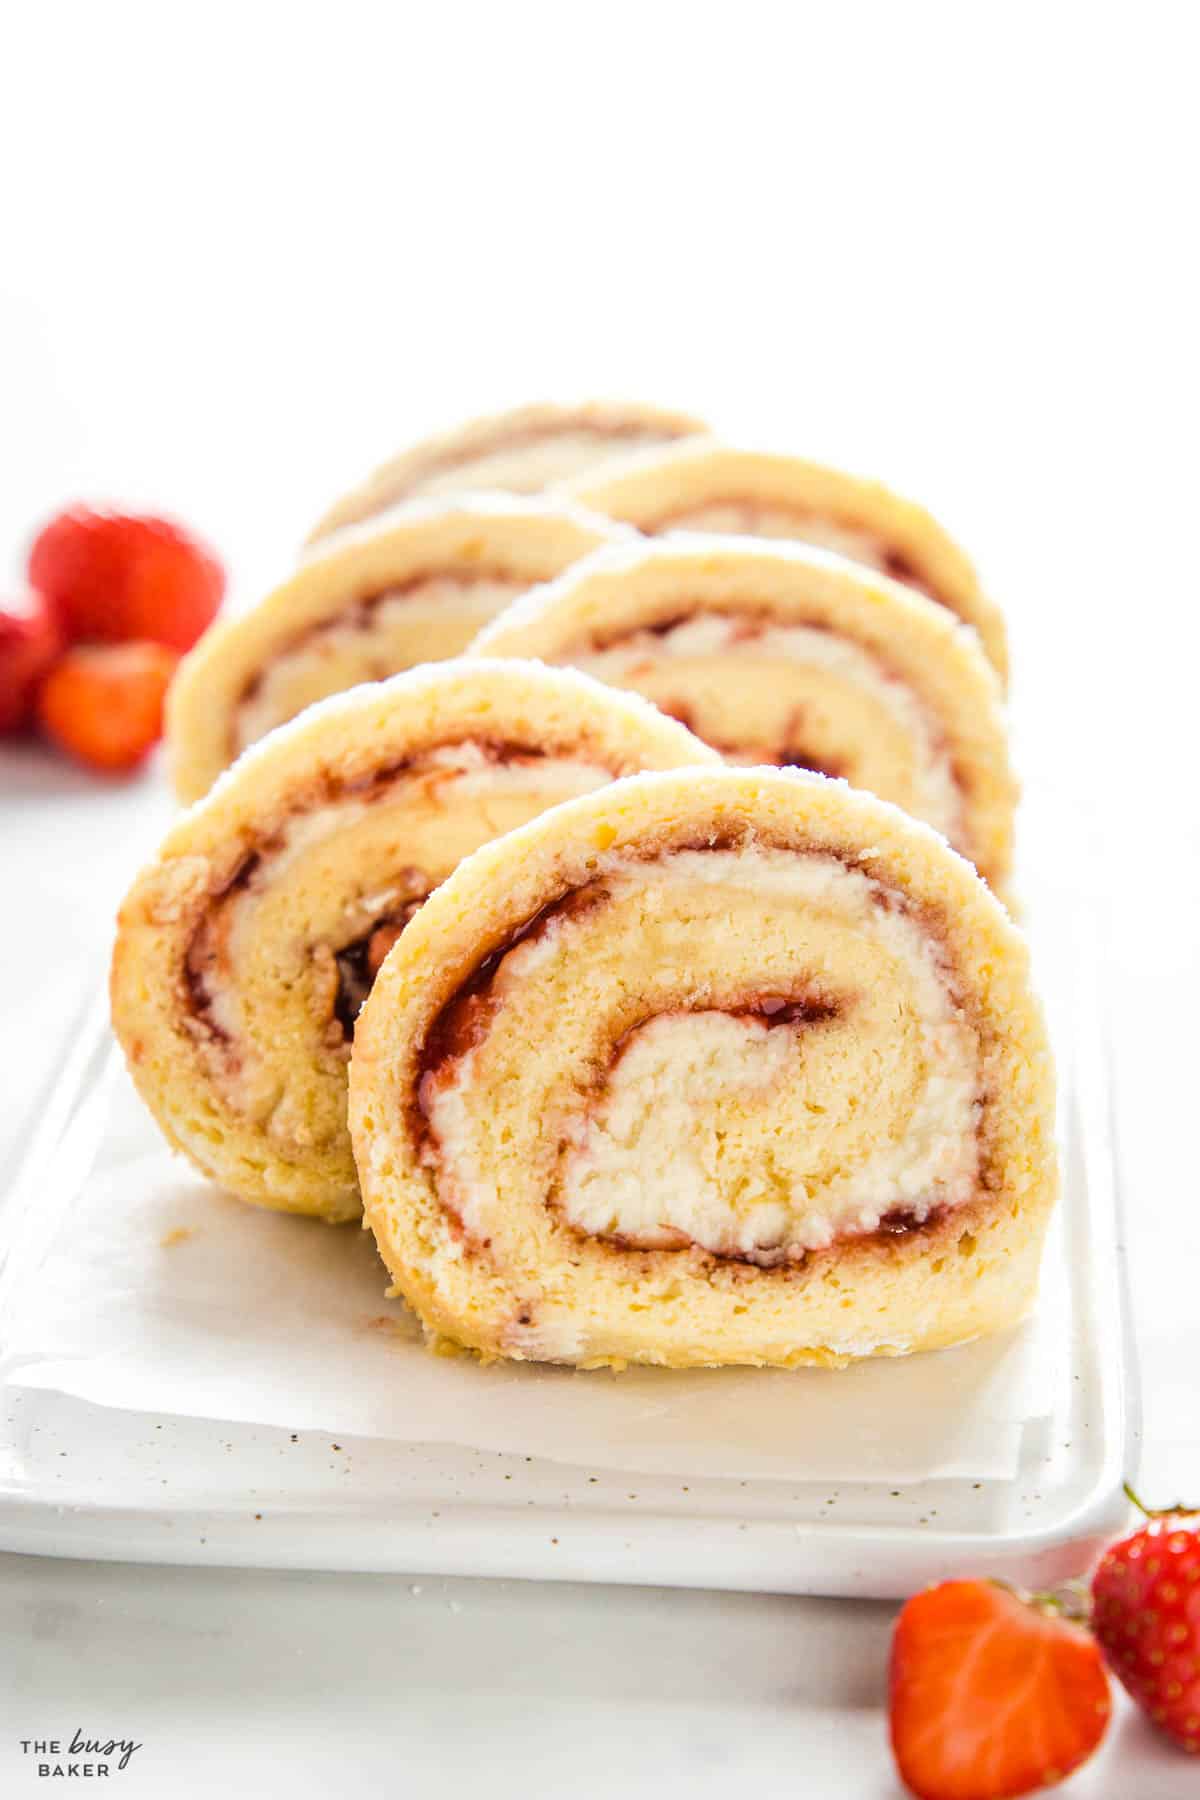 slices of rolled cake with strawberry jam and cream